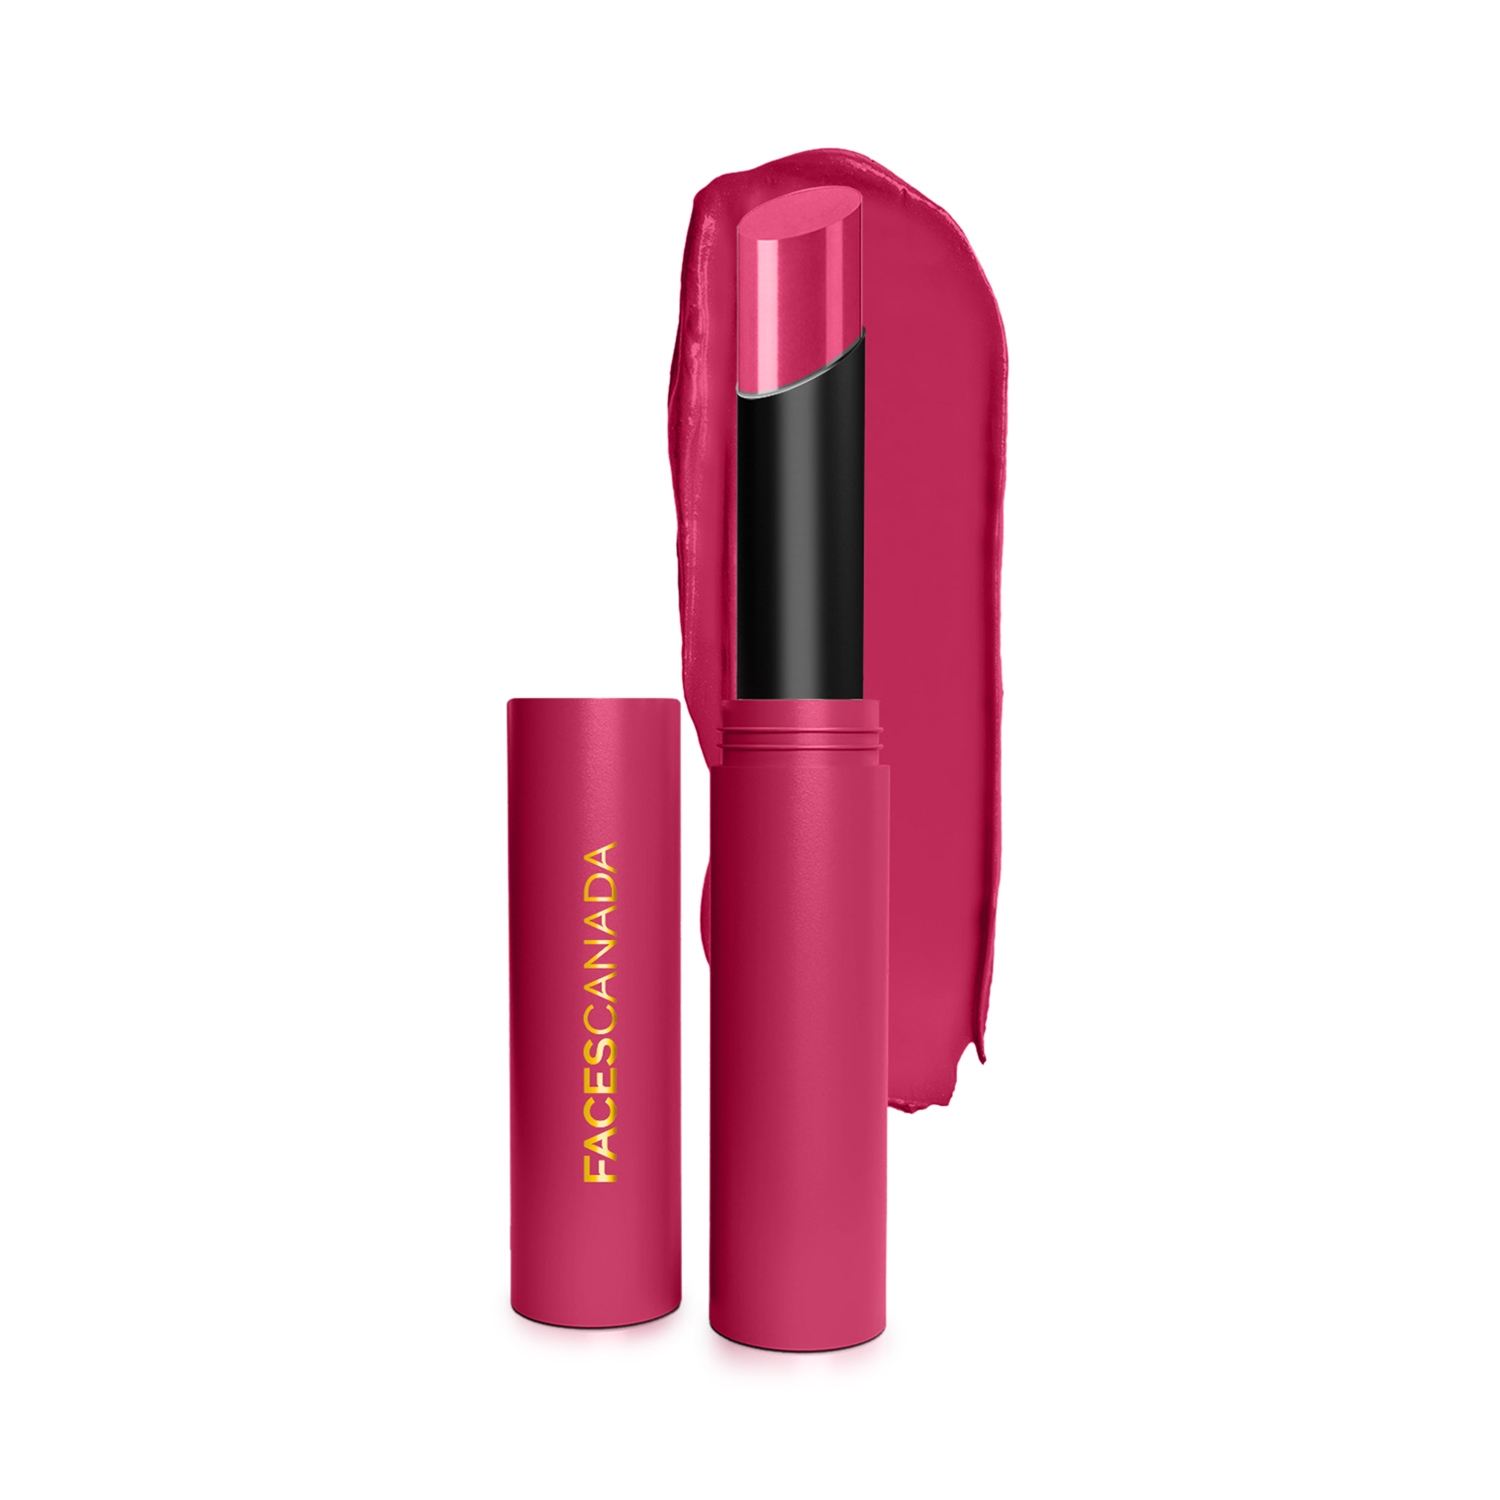 Faces Canada | Faces Canada 3-In-1 Long Stay Matte Lipstick - 01 Romantic Maroon (2g)